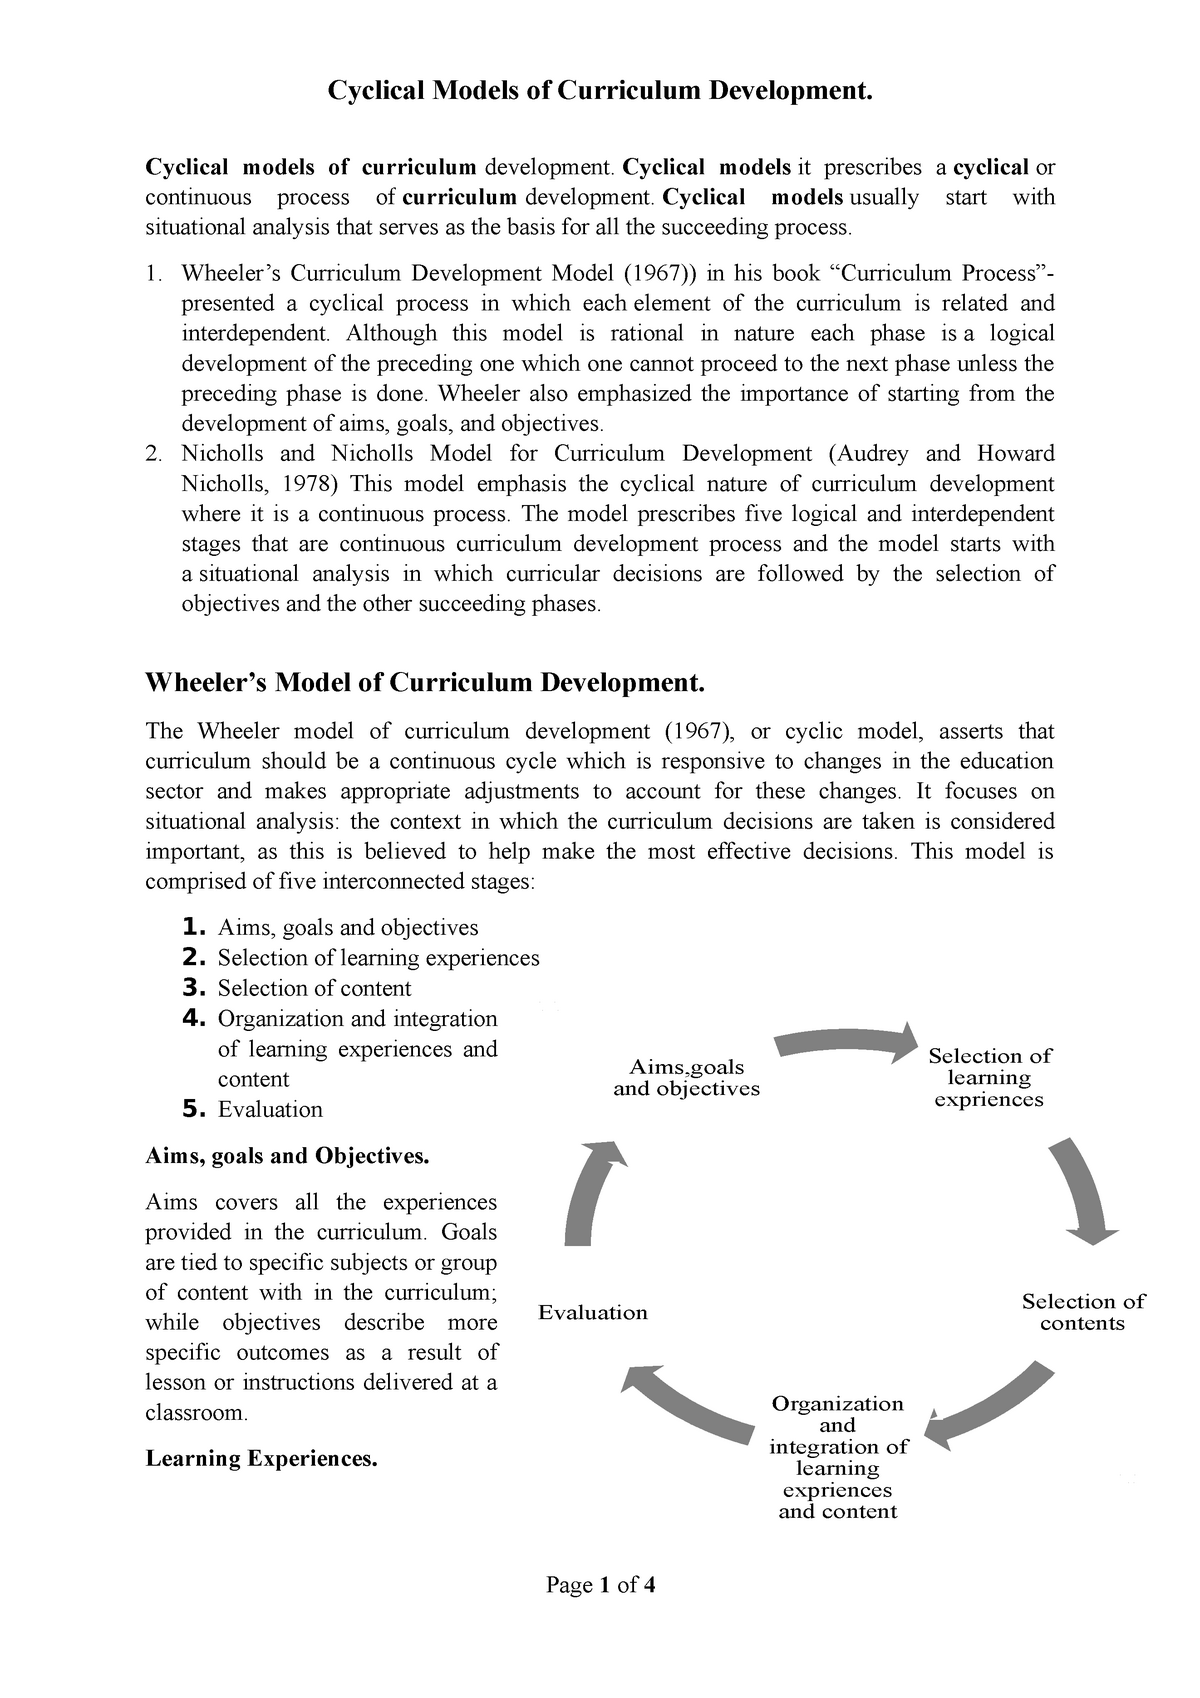 Bonnie Wright Leaked Curriculum Planning Model